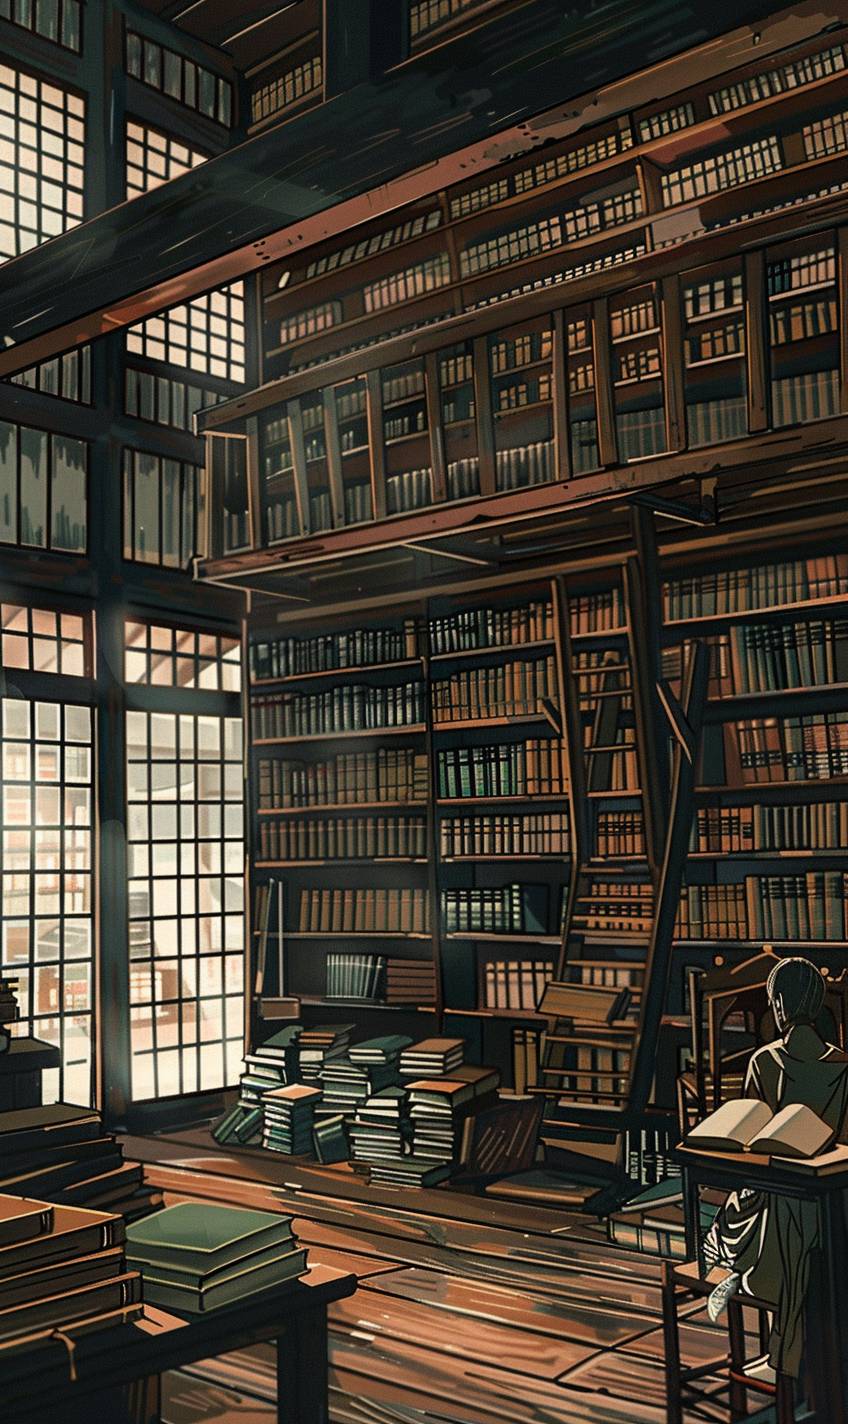 In the style of Katsushika Hokusai, a timeless library with endless shelves of books. --ar 3:5  --v 6.0